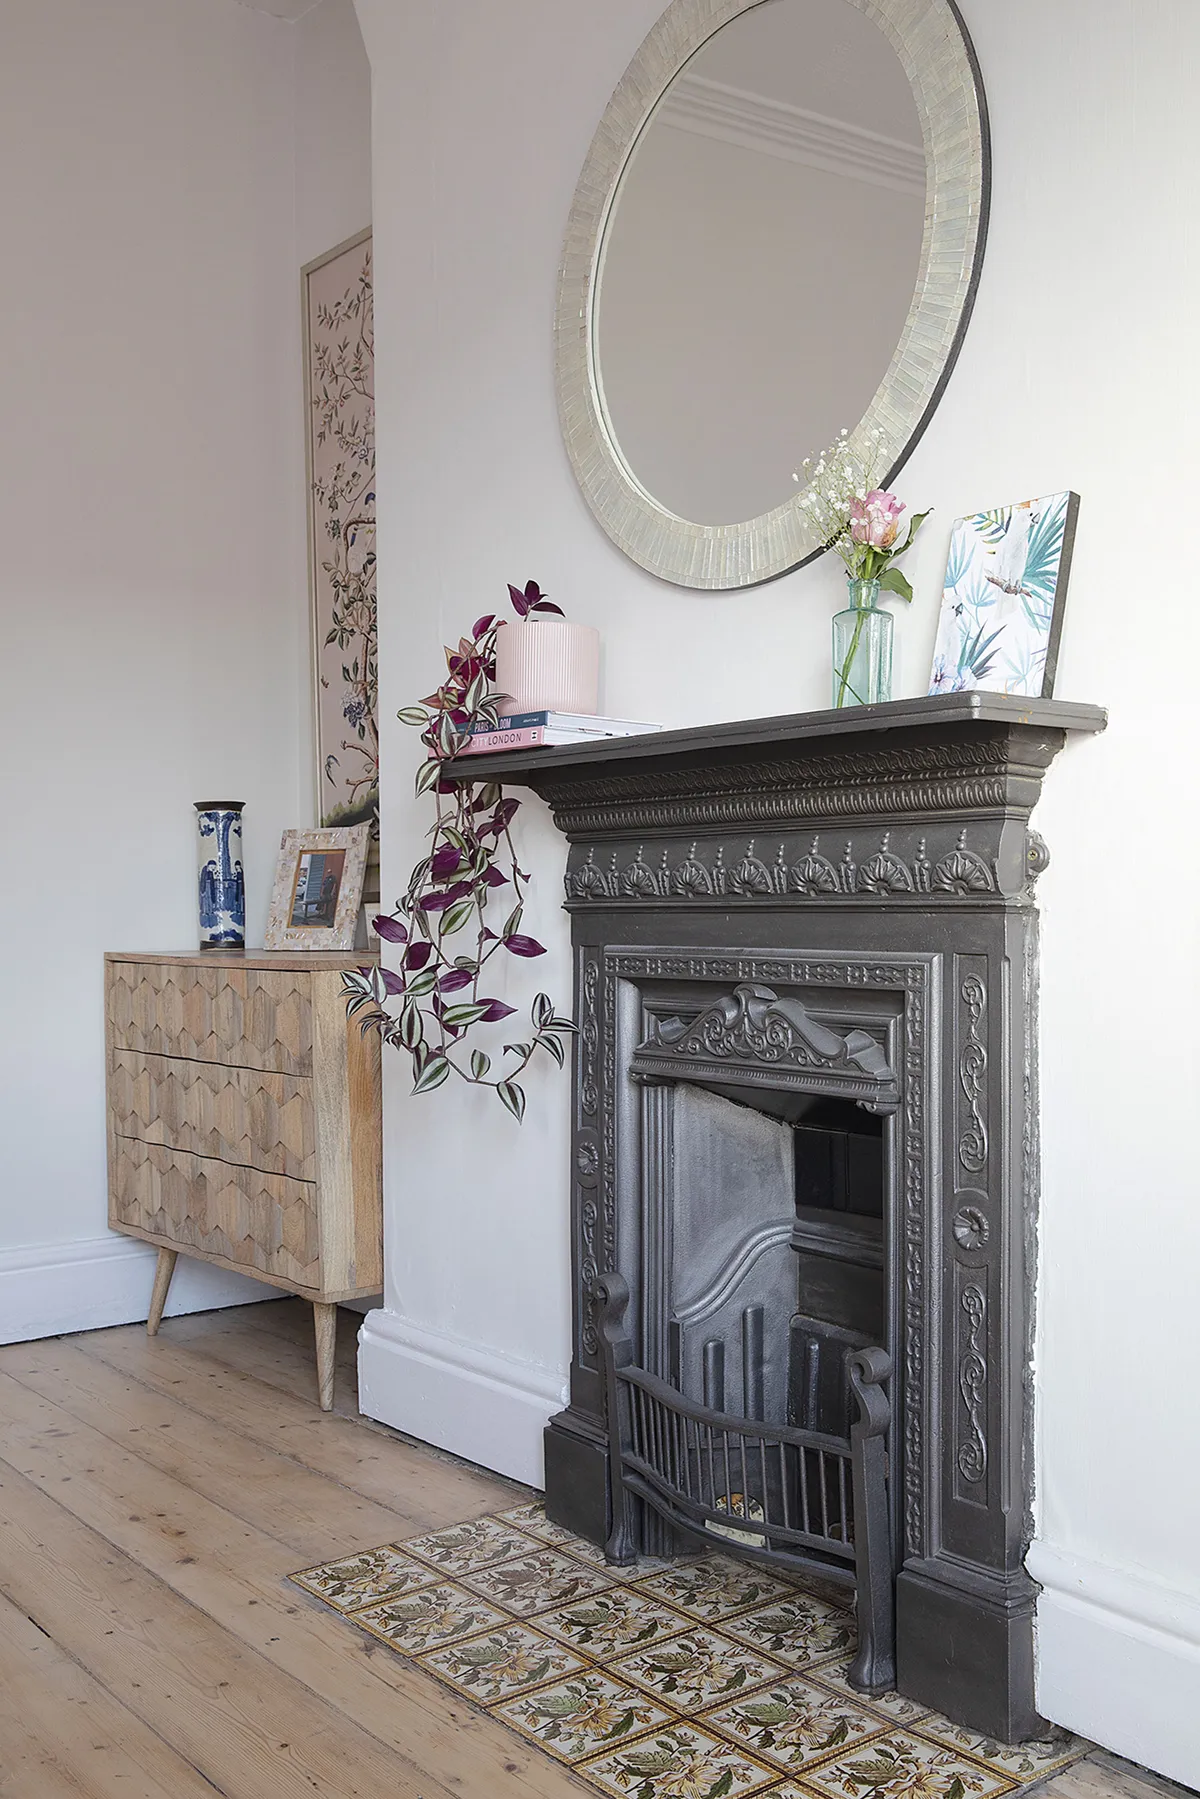 ‘The reclaimed fireplace is definitely my favourite feature in the room. It has beautiful details and took lots of hard work and time to restore it. The chest of drawers is from Swoon’